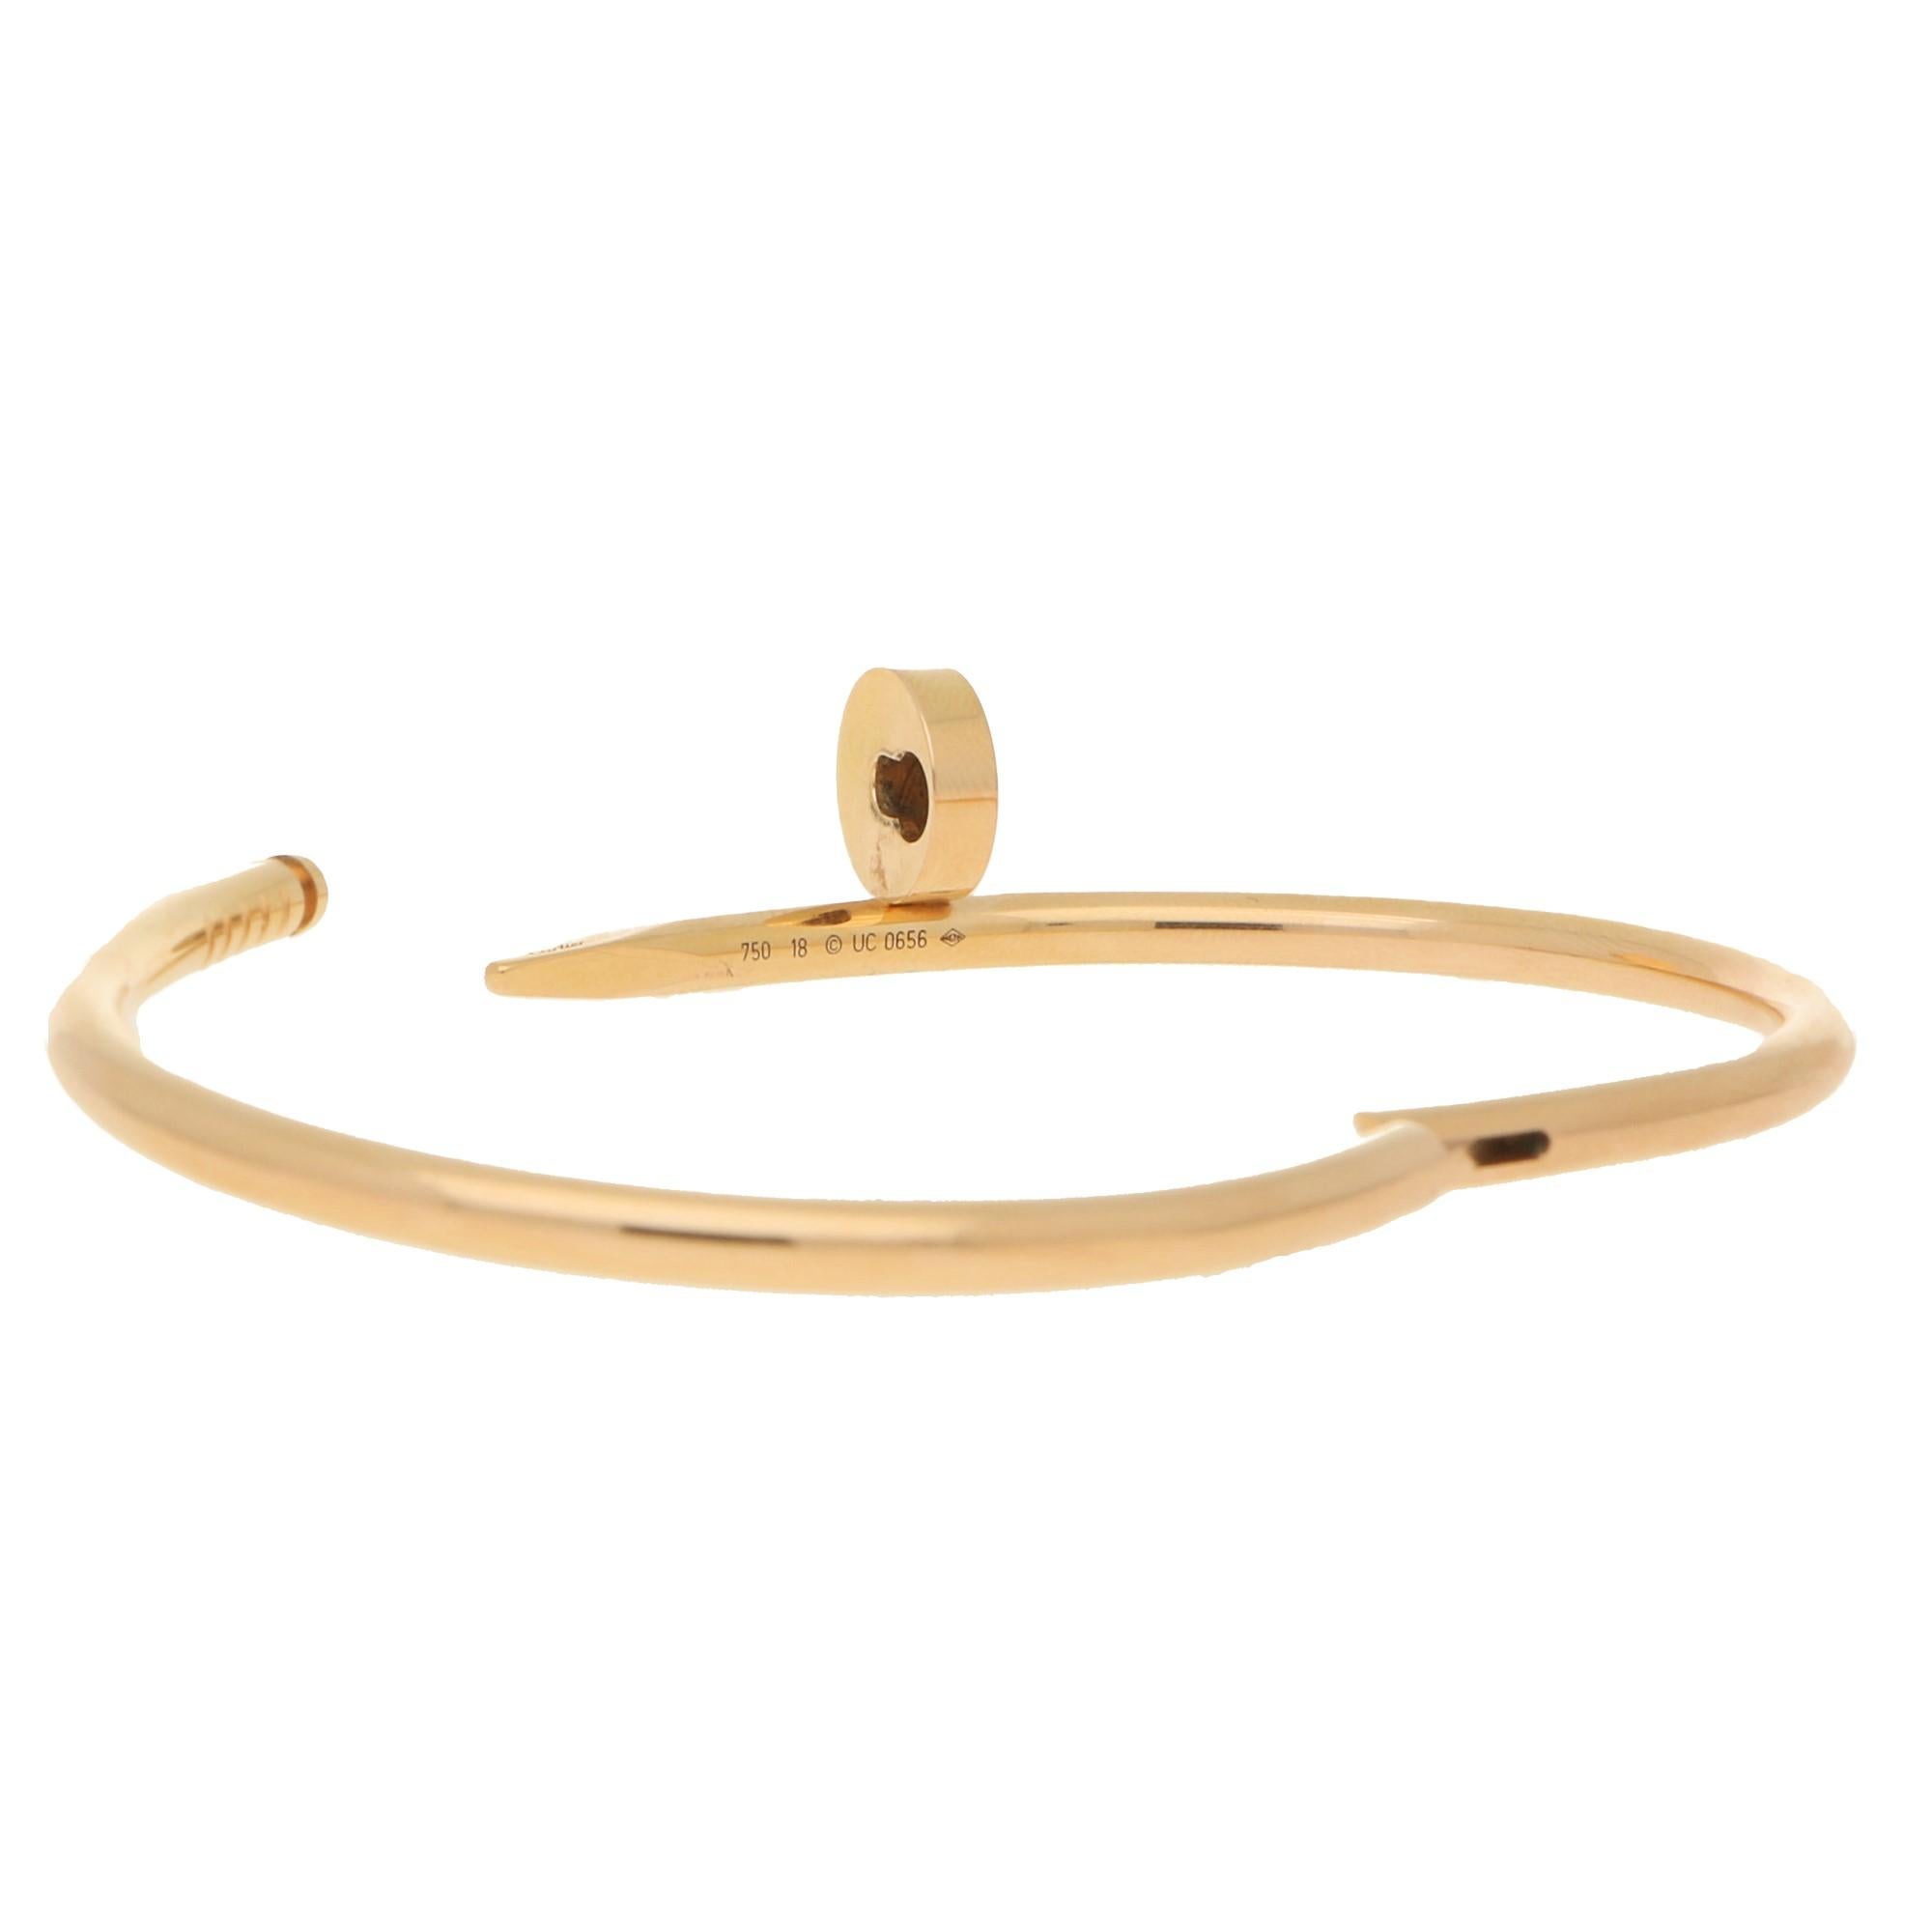 A classic Cartier Juste Un Clou bangle set in 18k rose gold. 

The bangle is from the older Juste Un Clou collection which means it is a little heavier in weight and has a different clasp mechanism. Unlike the modern bangles that have a hidden